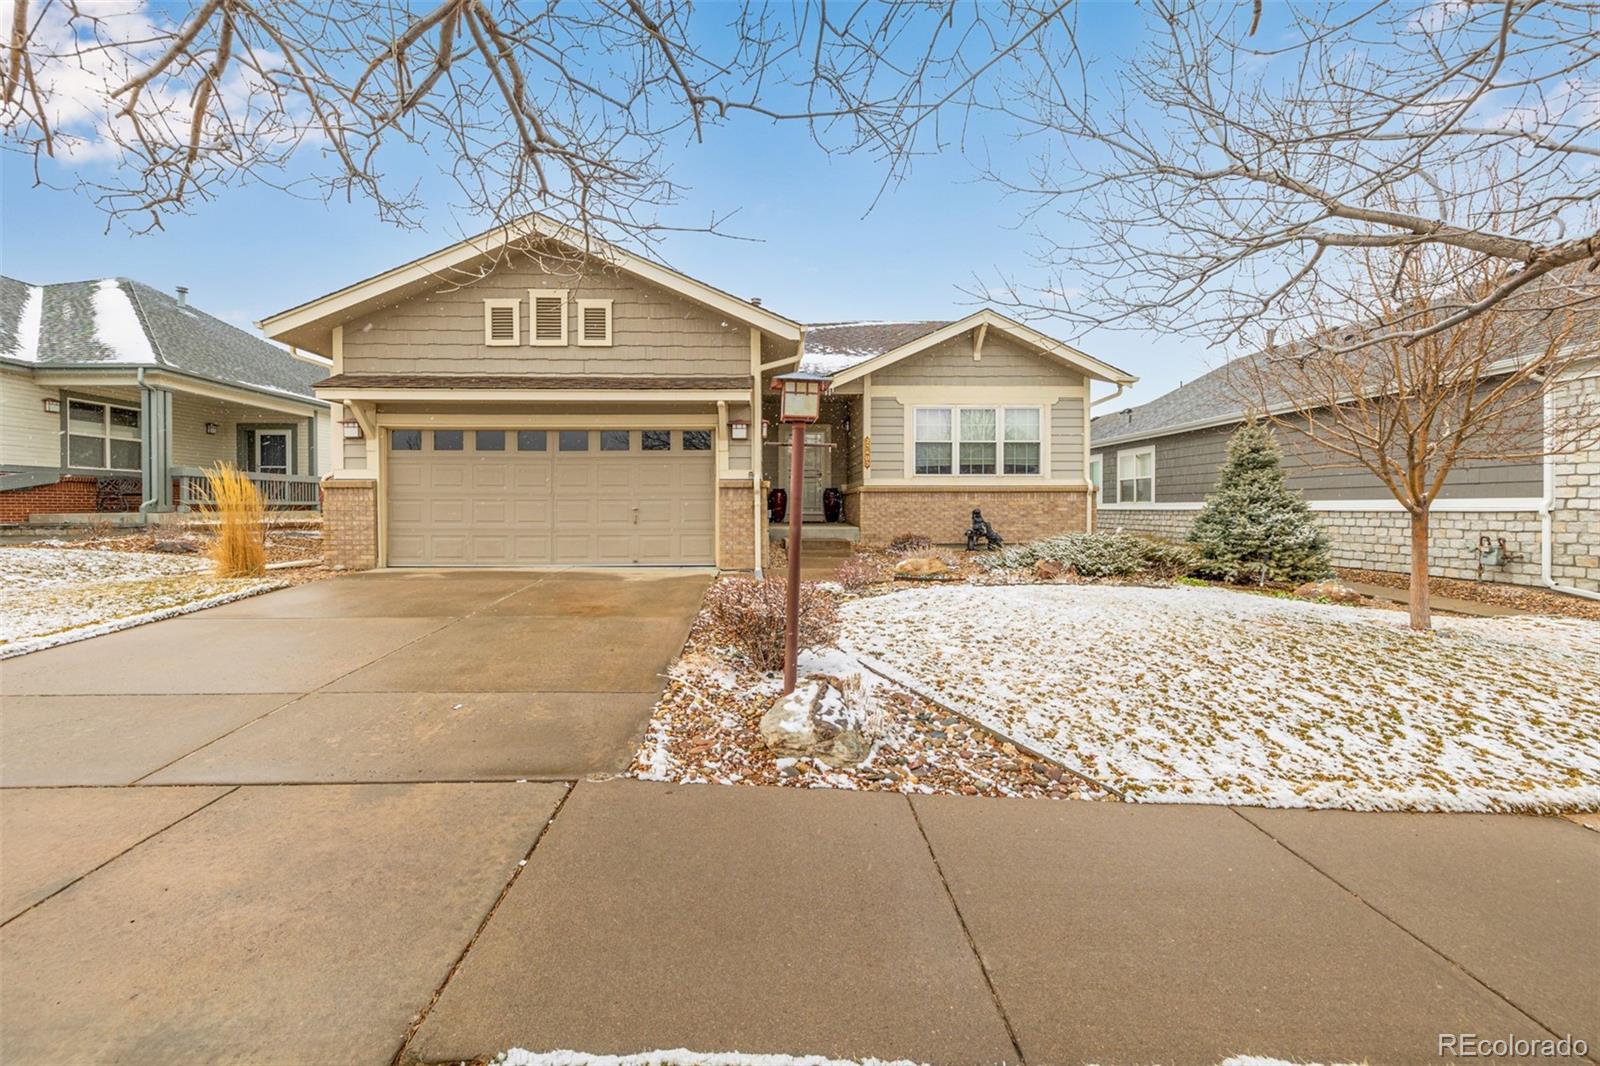 23403 e moraine place, aurora sold home. Closed on 2024-05-08 for $680,000.